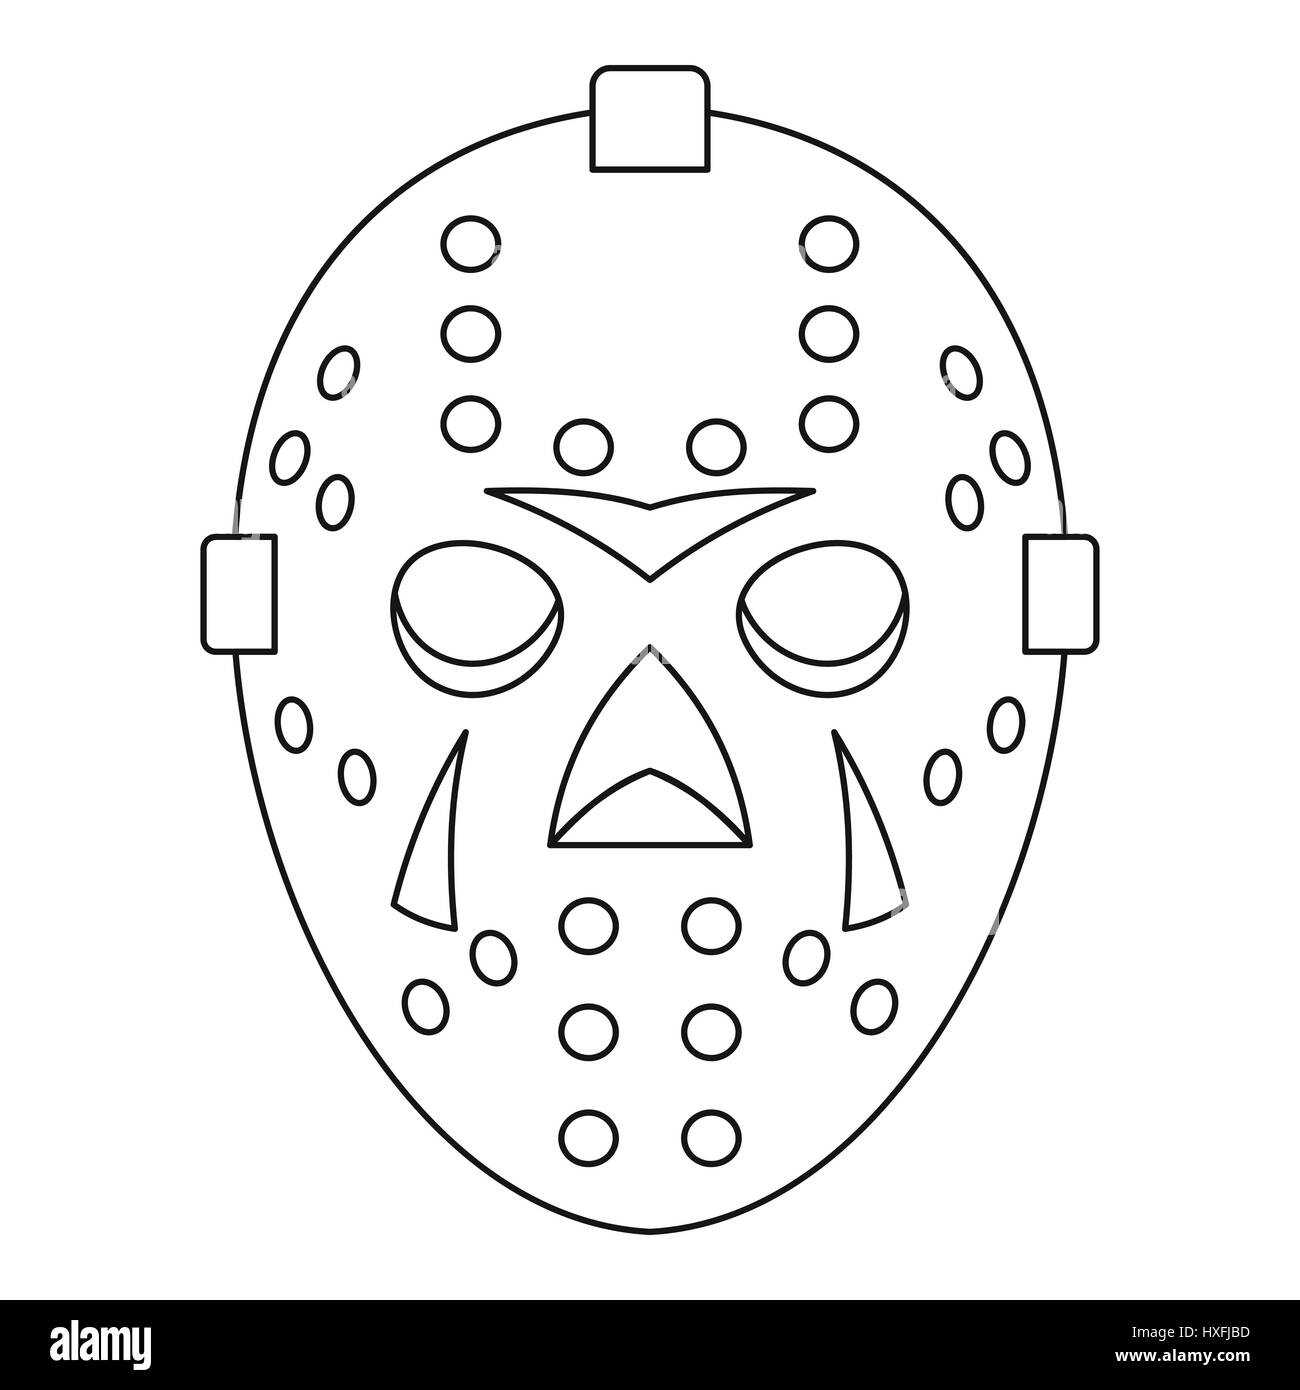 Design Your Own Vintage Goalie Mask: A Drawing and Coloring Book - 8 x 10  Full Page Templates to Design and Color For Hockey Fans of Any Age